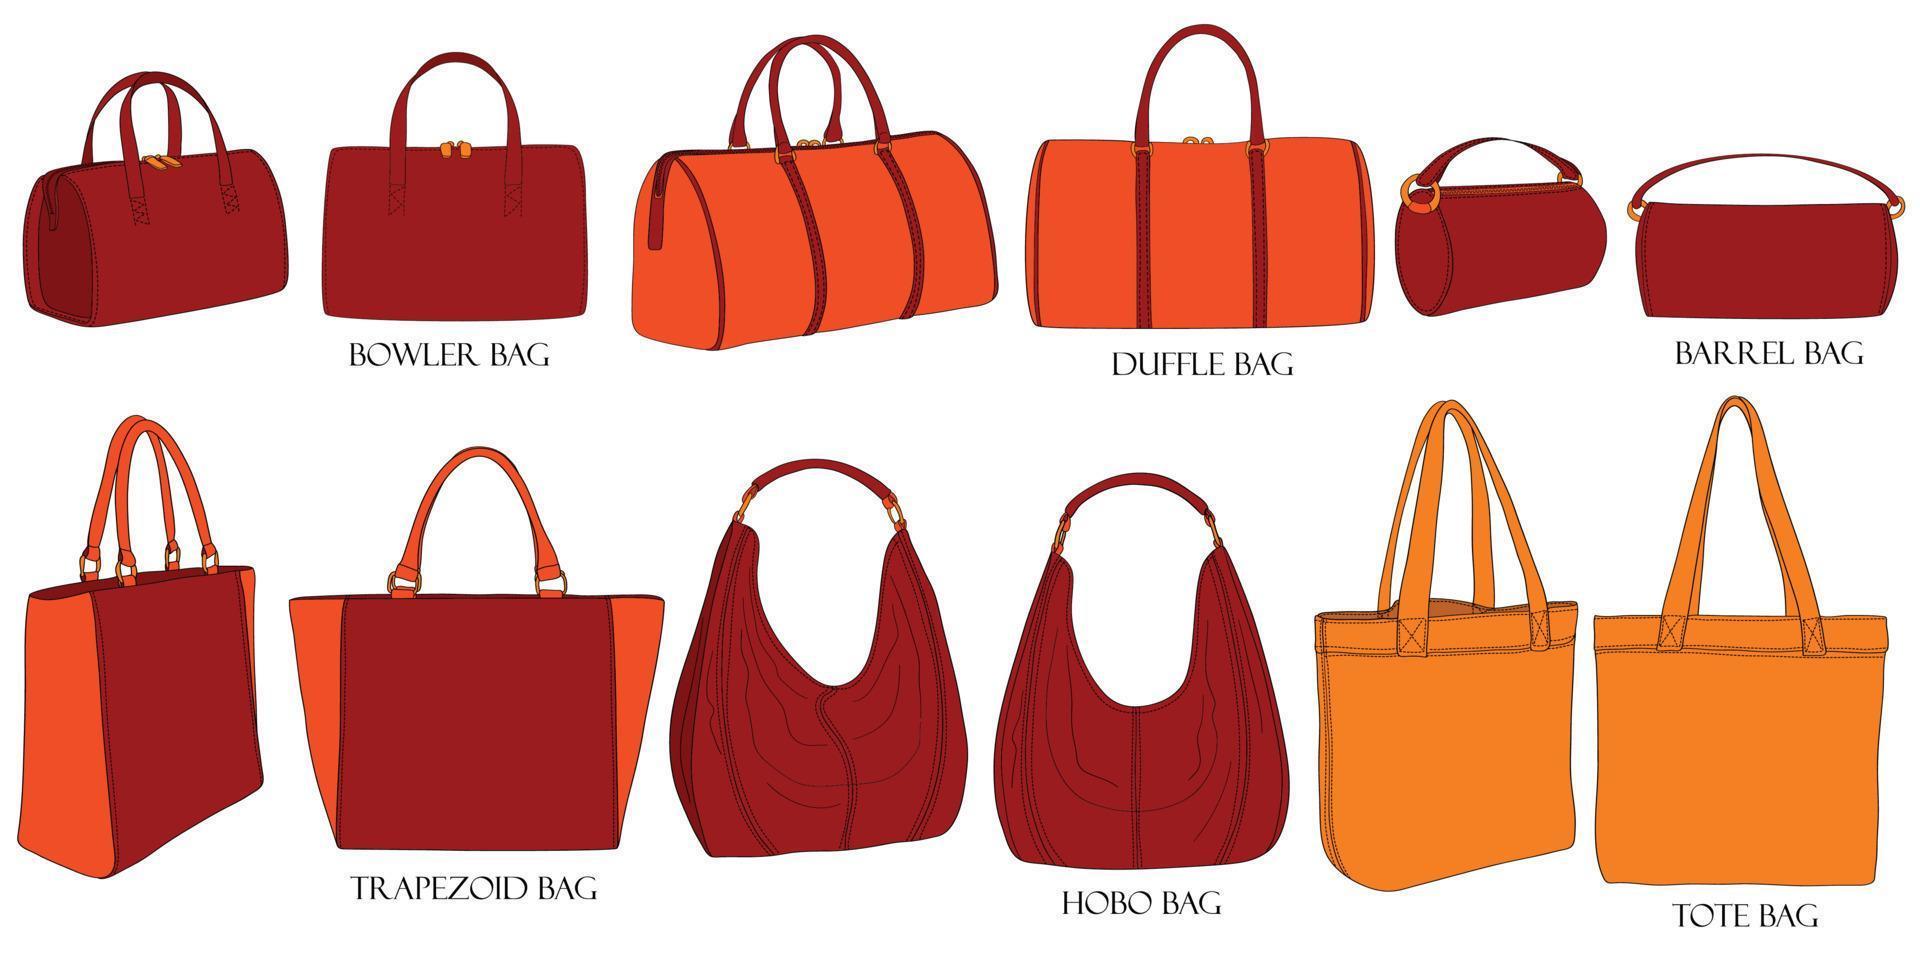 Women Handbags Flat Line Icons. Bags Types - Crossbody, Backpacks, Clutch,  Totes, Hobo, Leather Briefcase, Luggage Stock Vector - Illustration of  business, messenger: 113734333